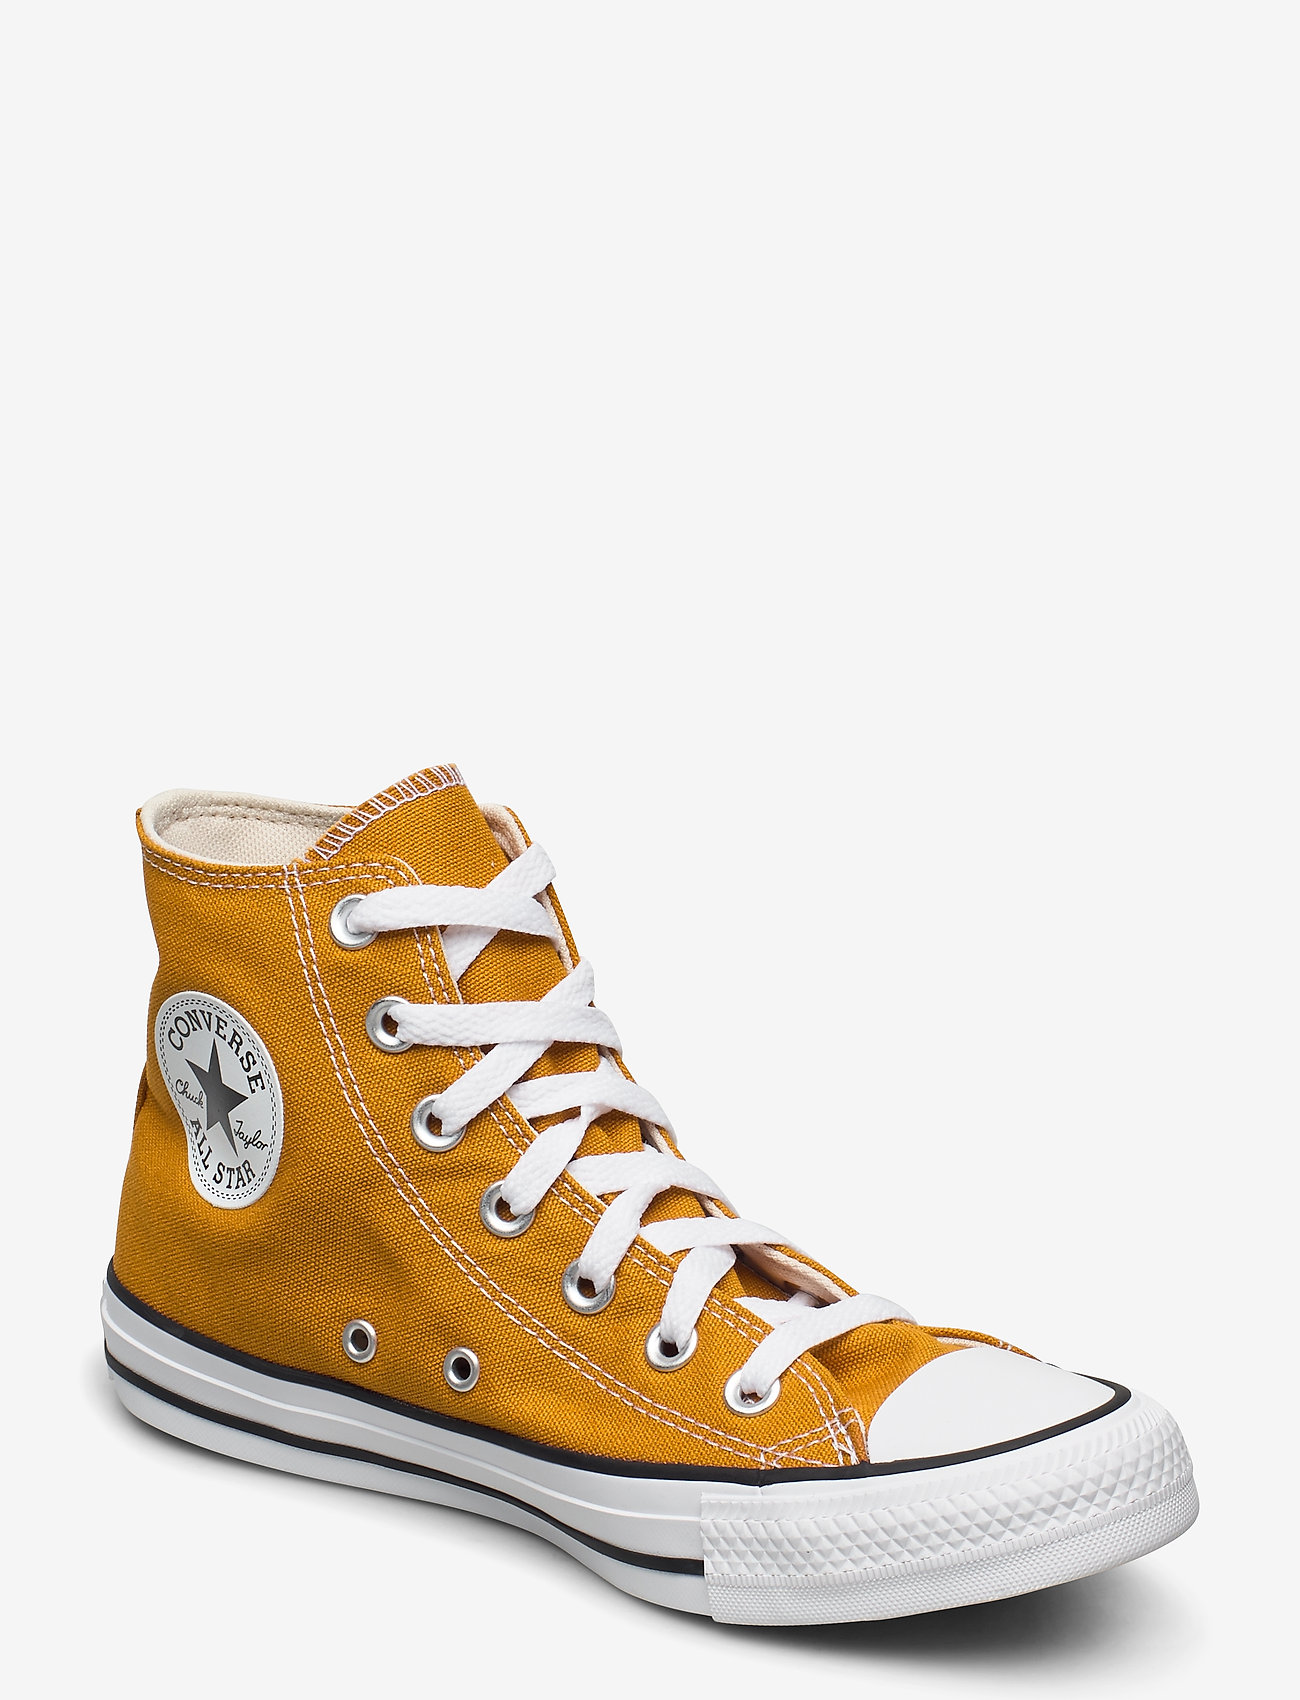 converse all star chuck 7 high top plimsolls in yellow